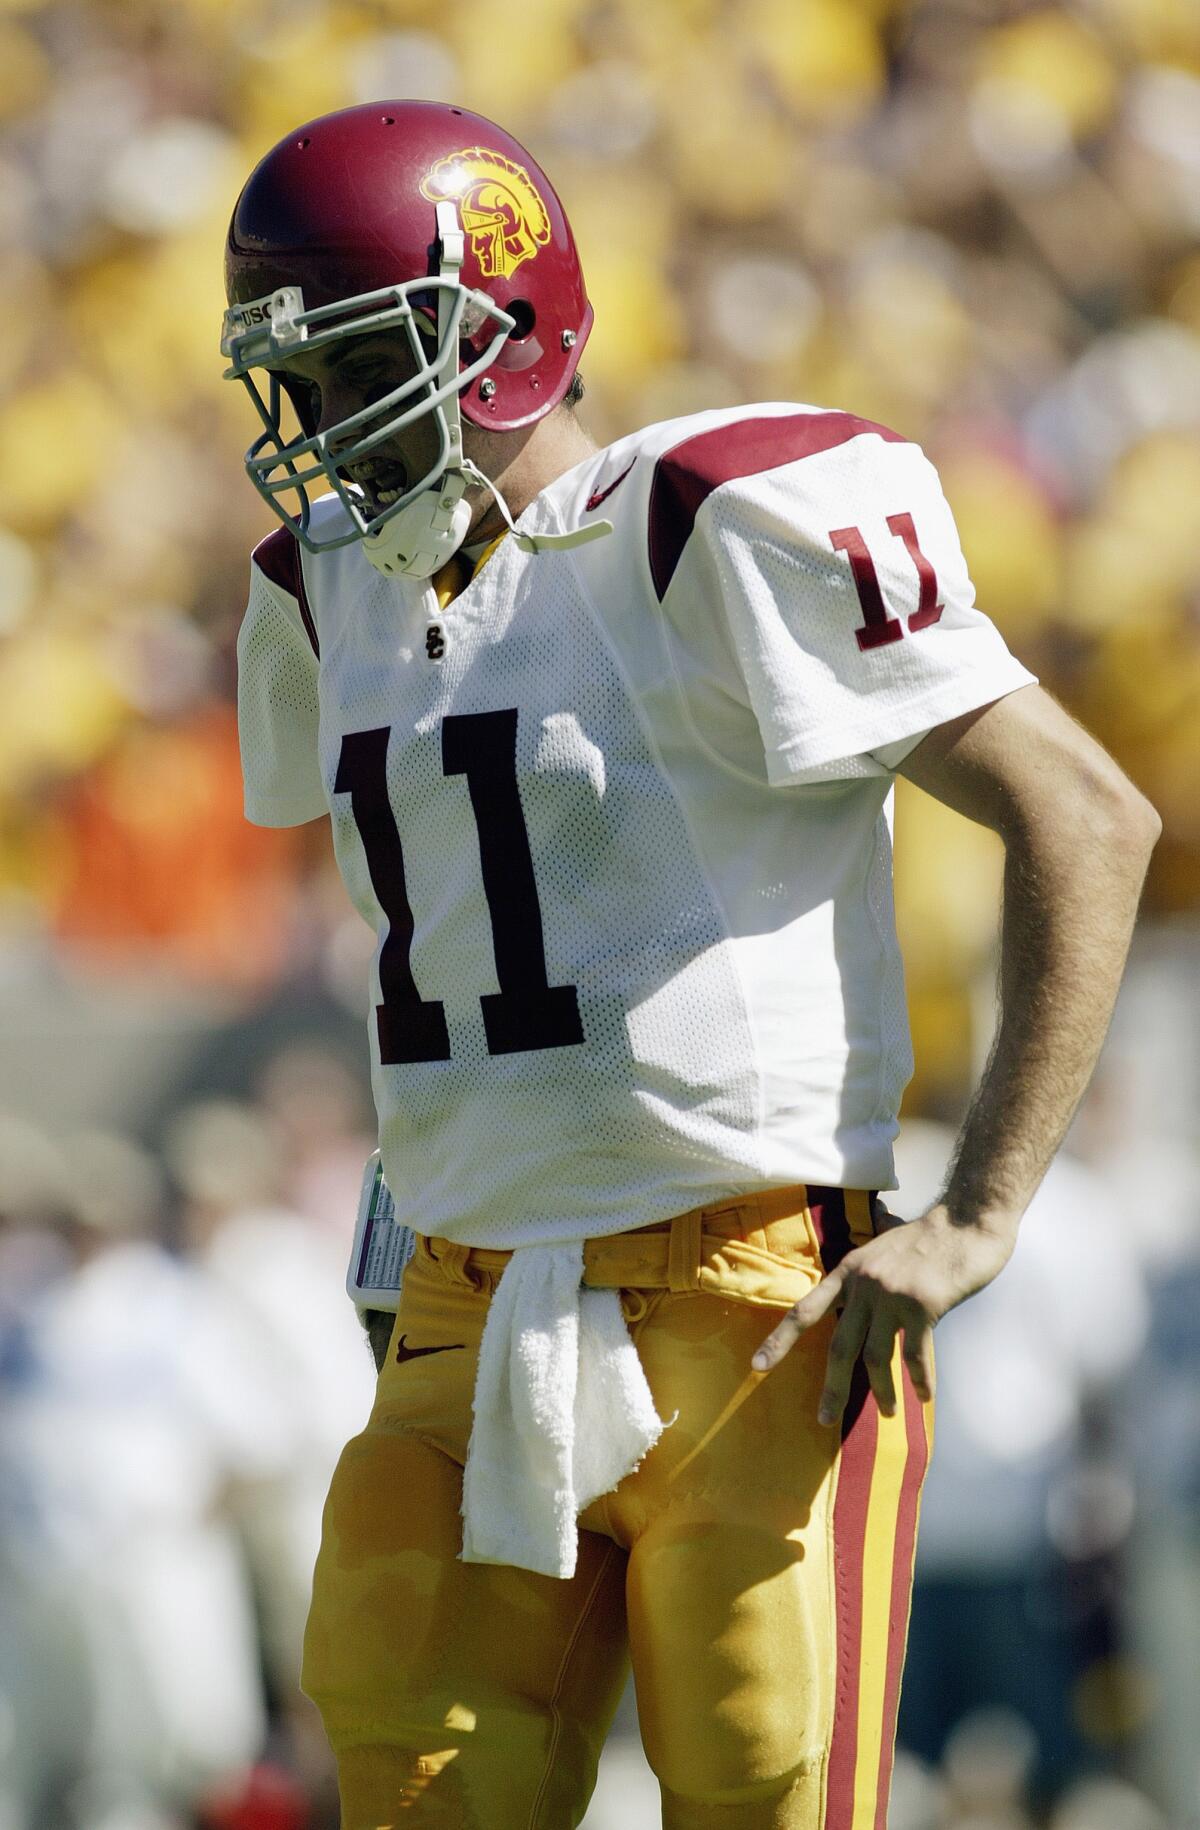 Quarterback Matt Leinart of the USC grimaces as he comes out of the game after injuring himself against the Arizona State.